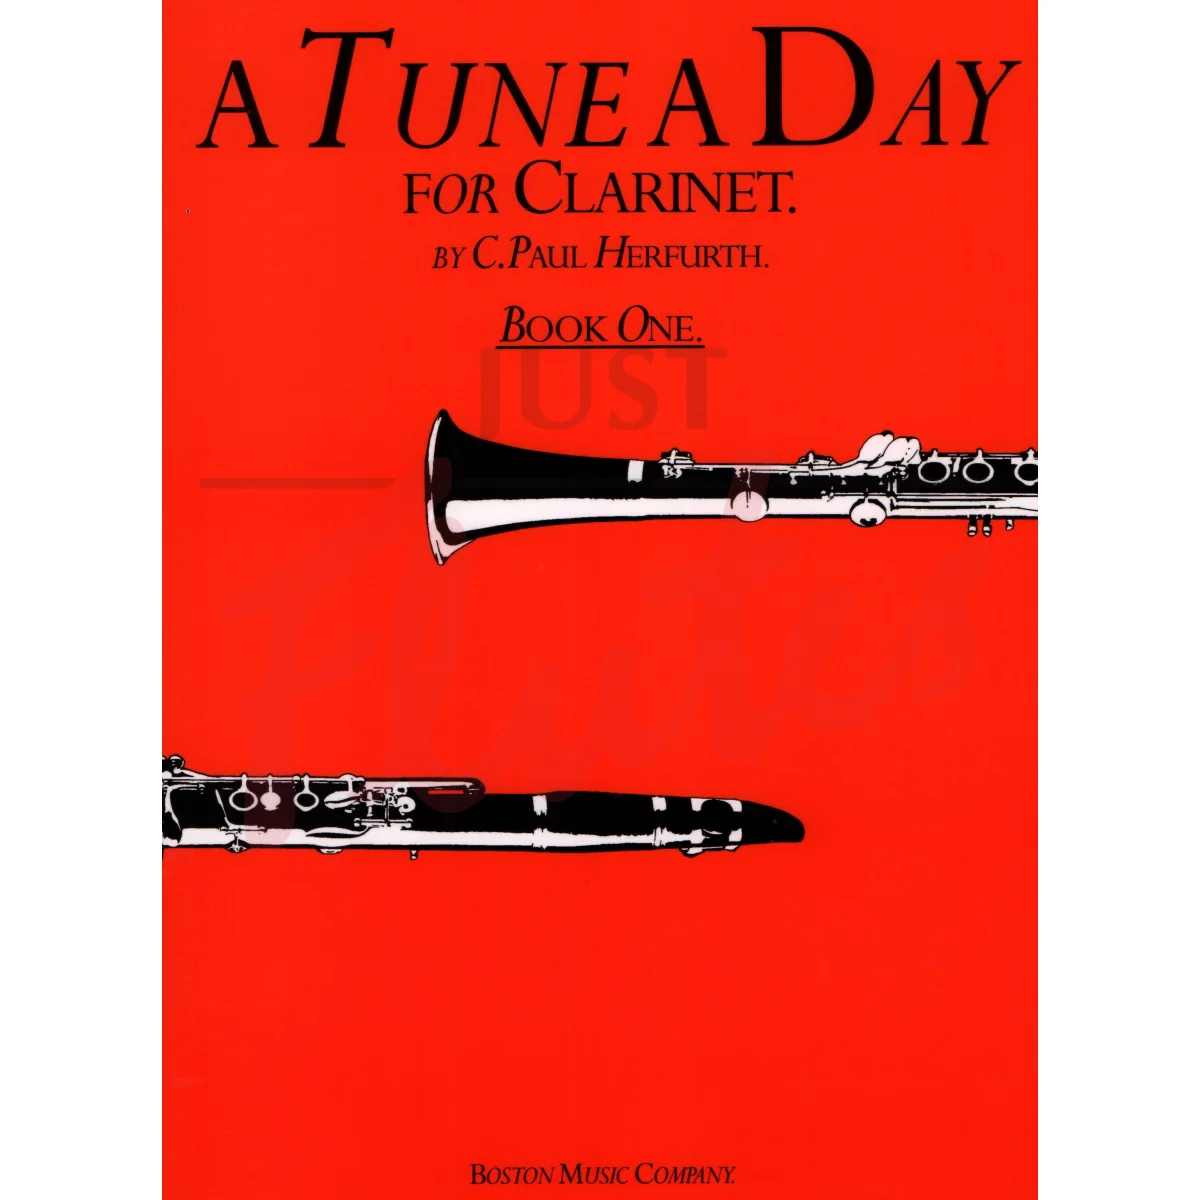 A Tune A Day for Clarinet, Book 1